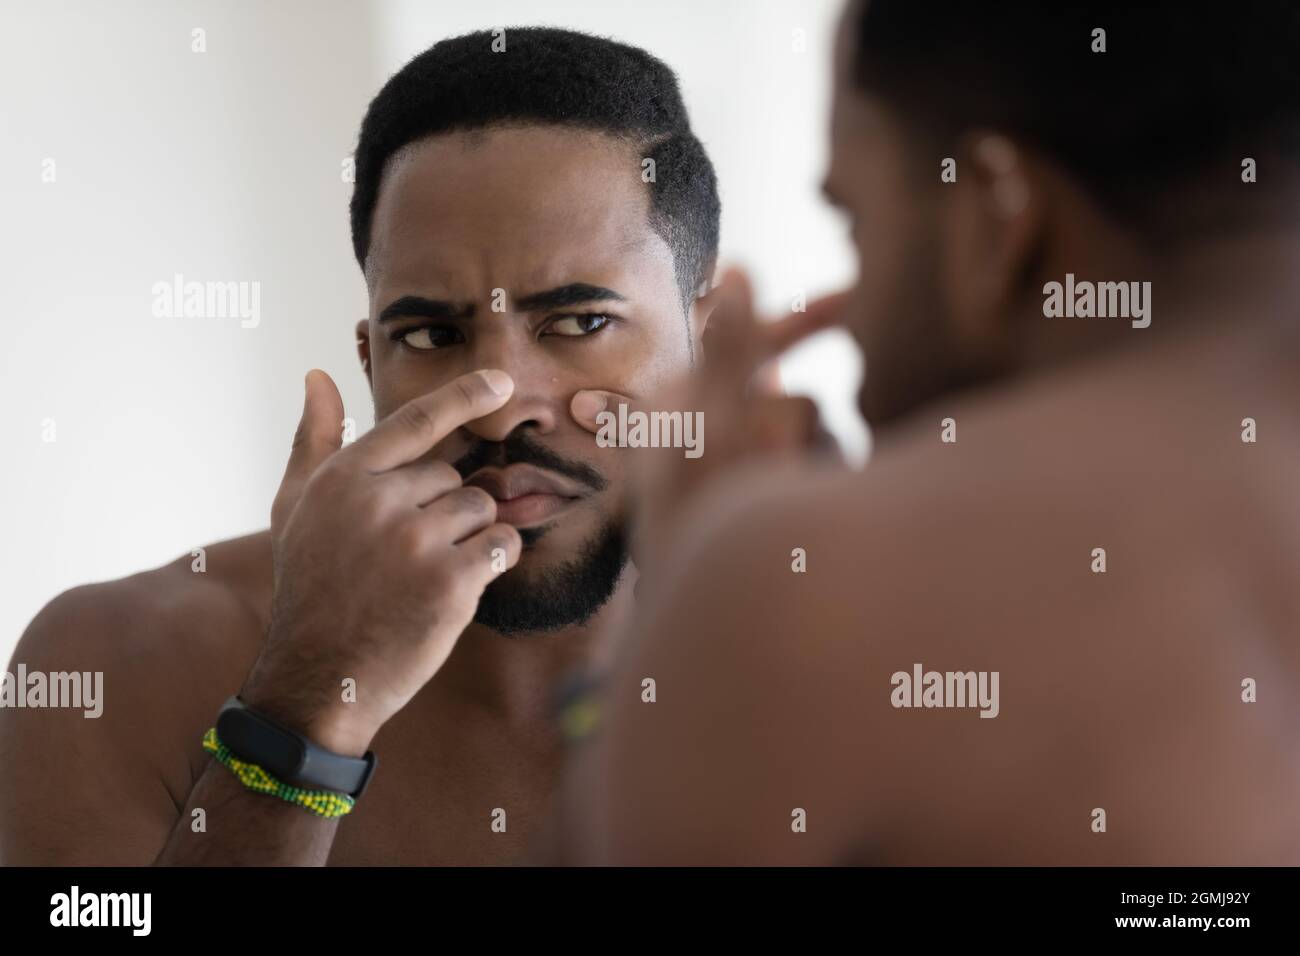 African guy looks in mirror touch face squeezes pimple Stock Photo